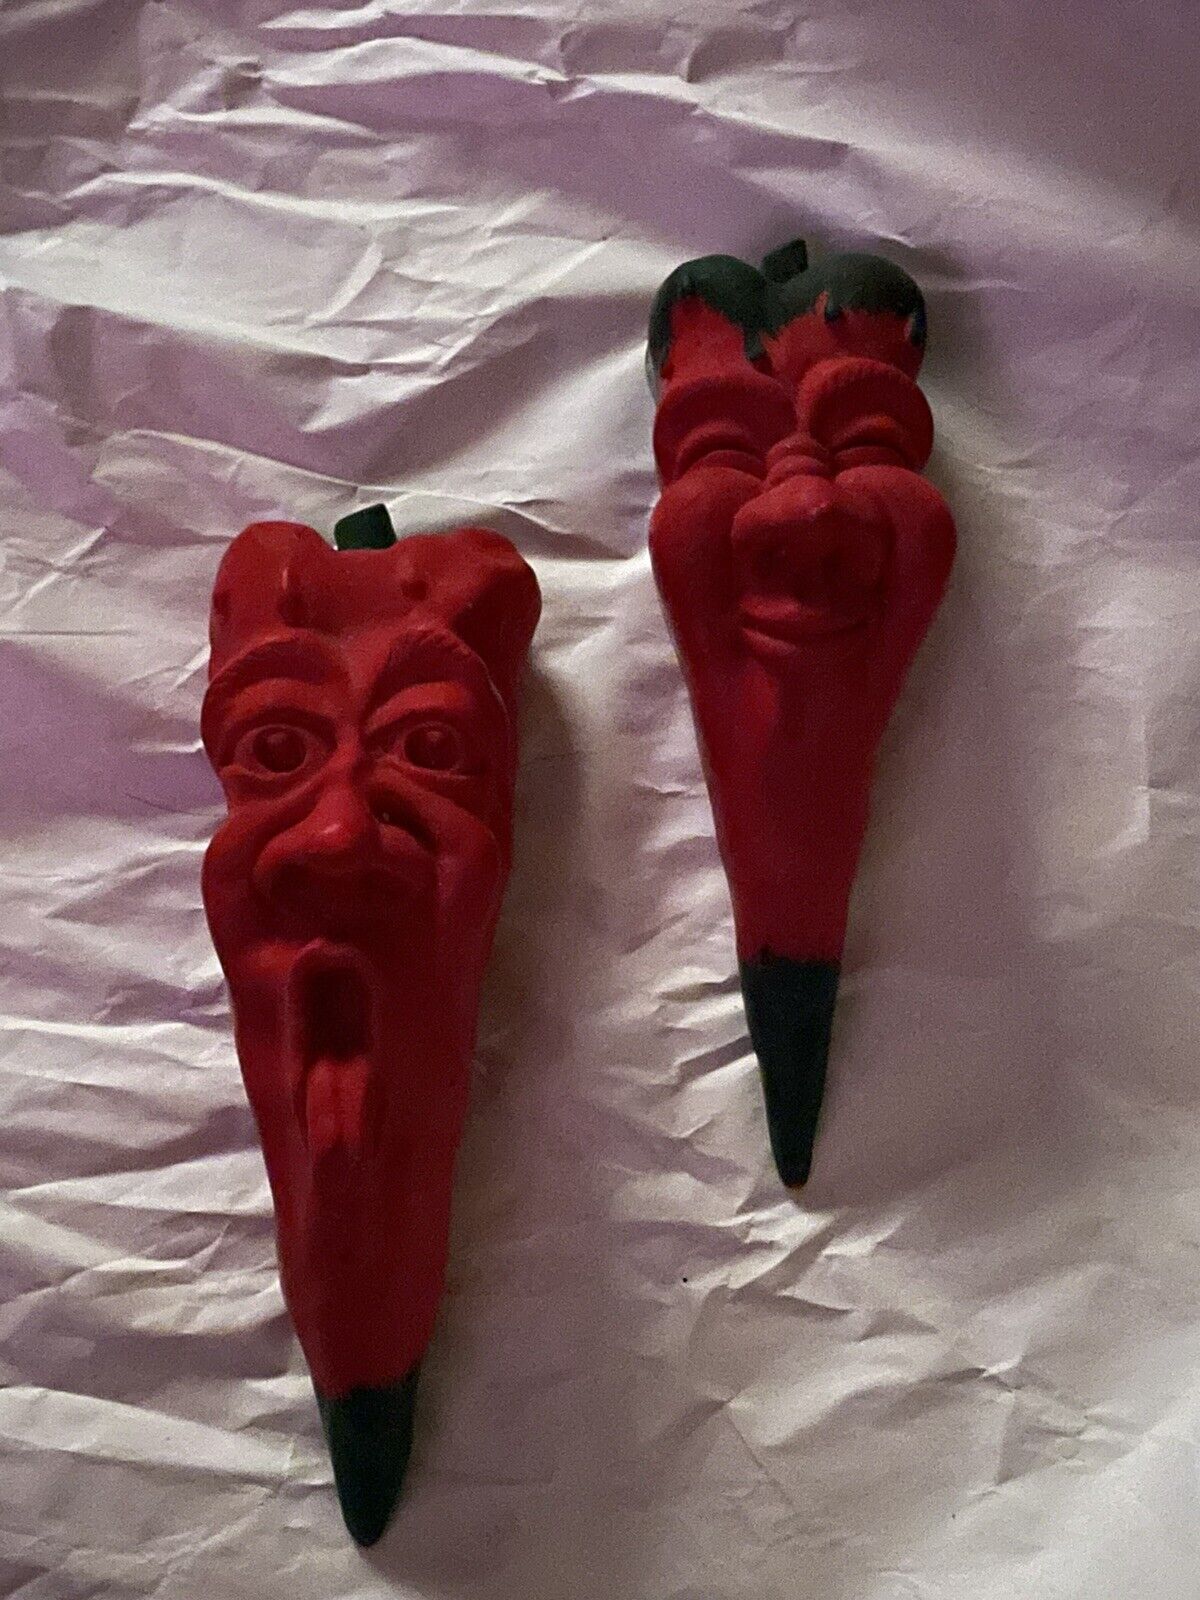 R Vandamme 1996 Red Chili Peppers Ceramic Anthropomorphic Faces Signed Wall Art